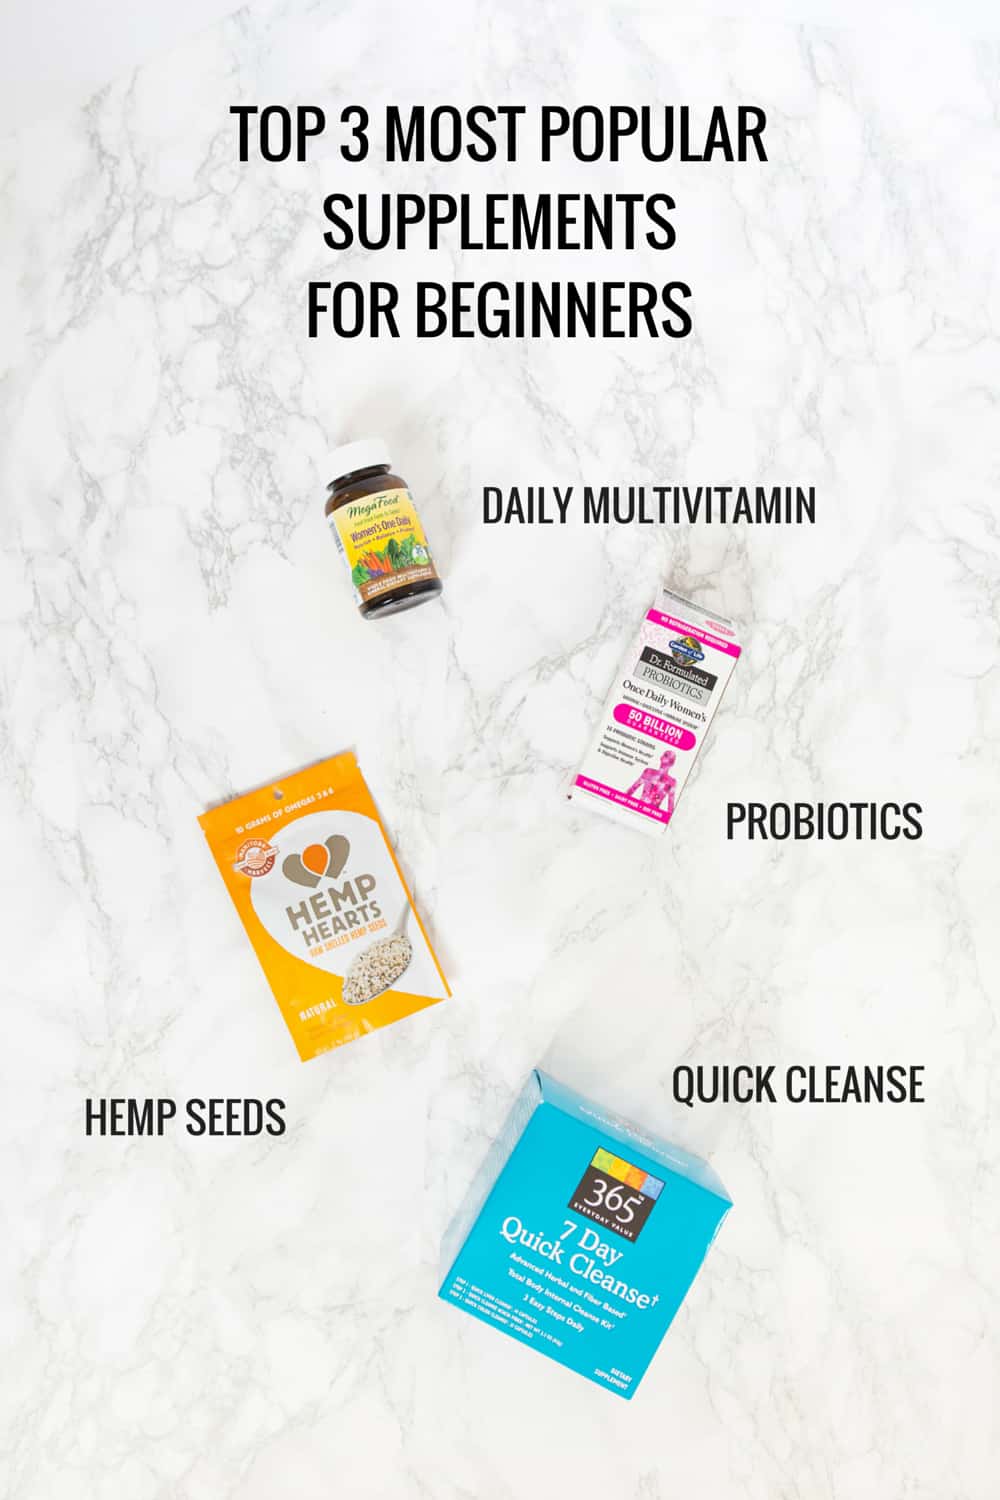 Top 3 Most Popular Supplements For Beginners